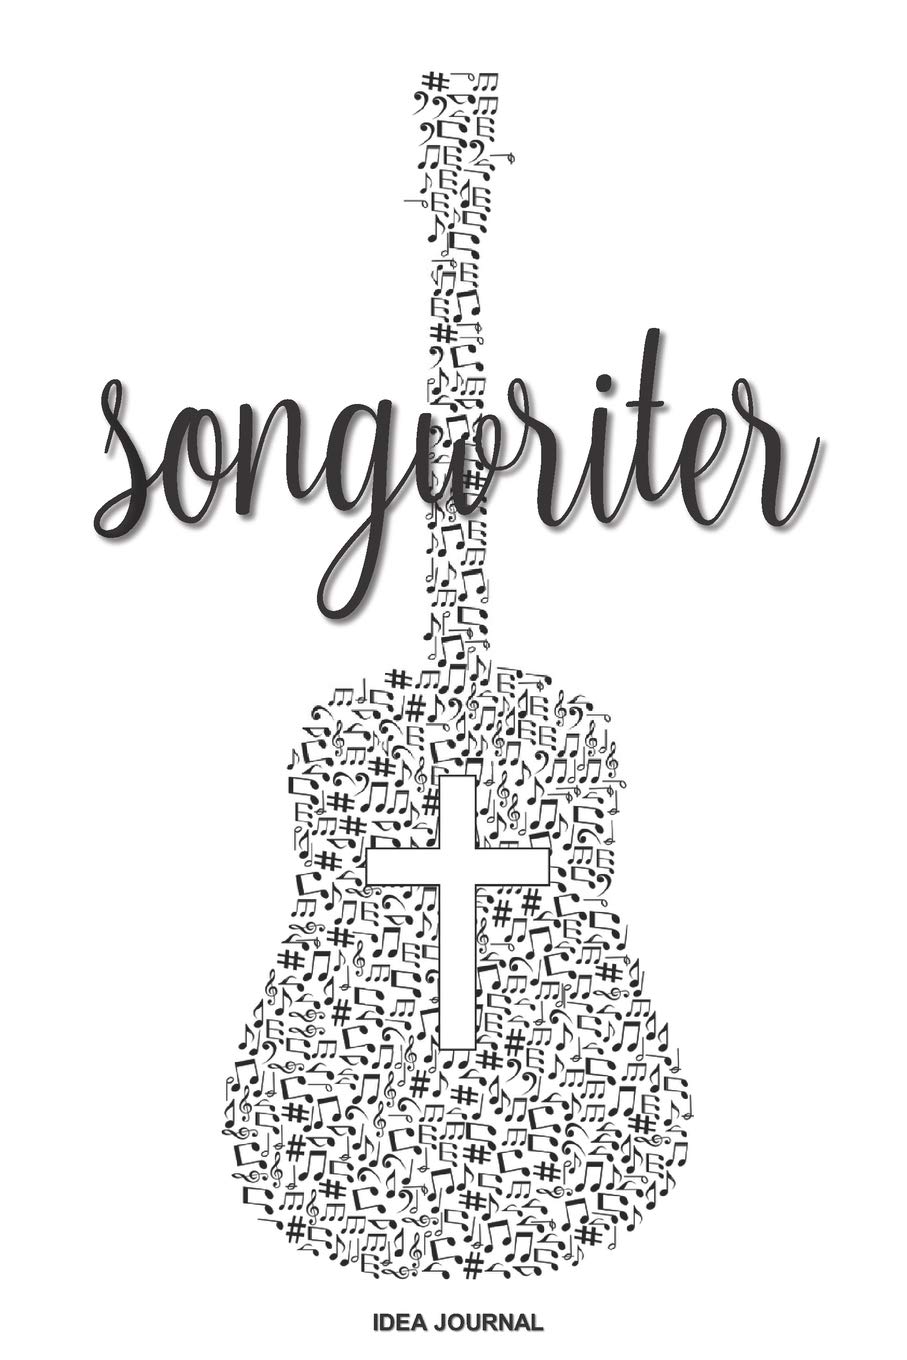 Famous Christian Songwriter Christian Songwriting Help Ideas